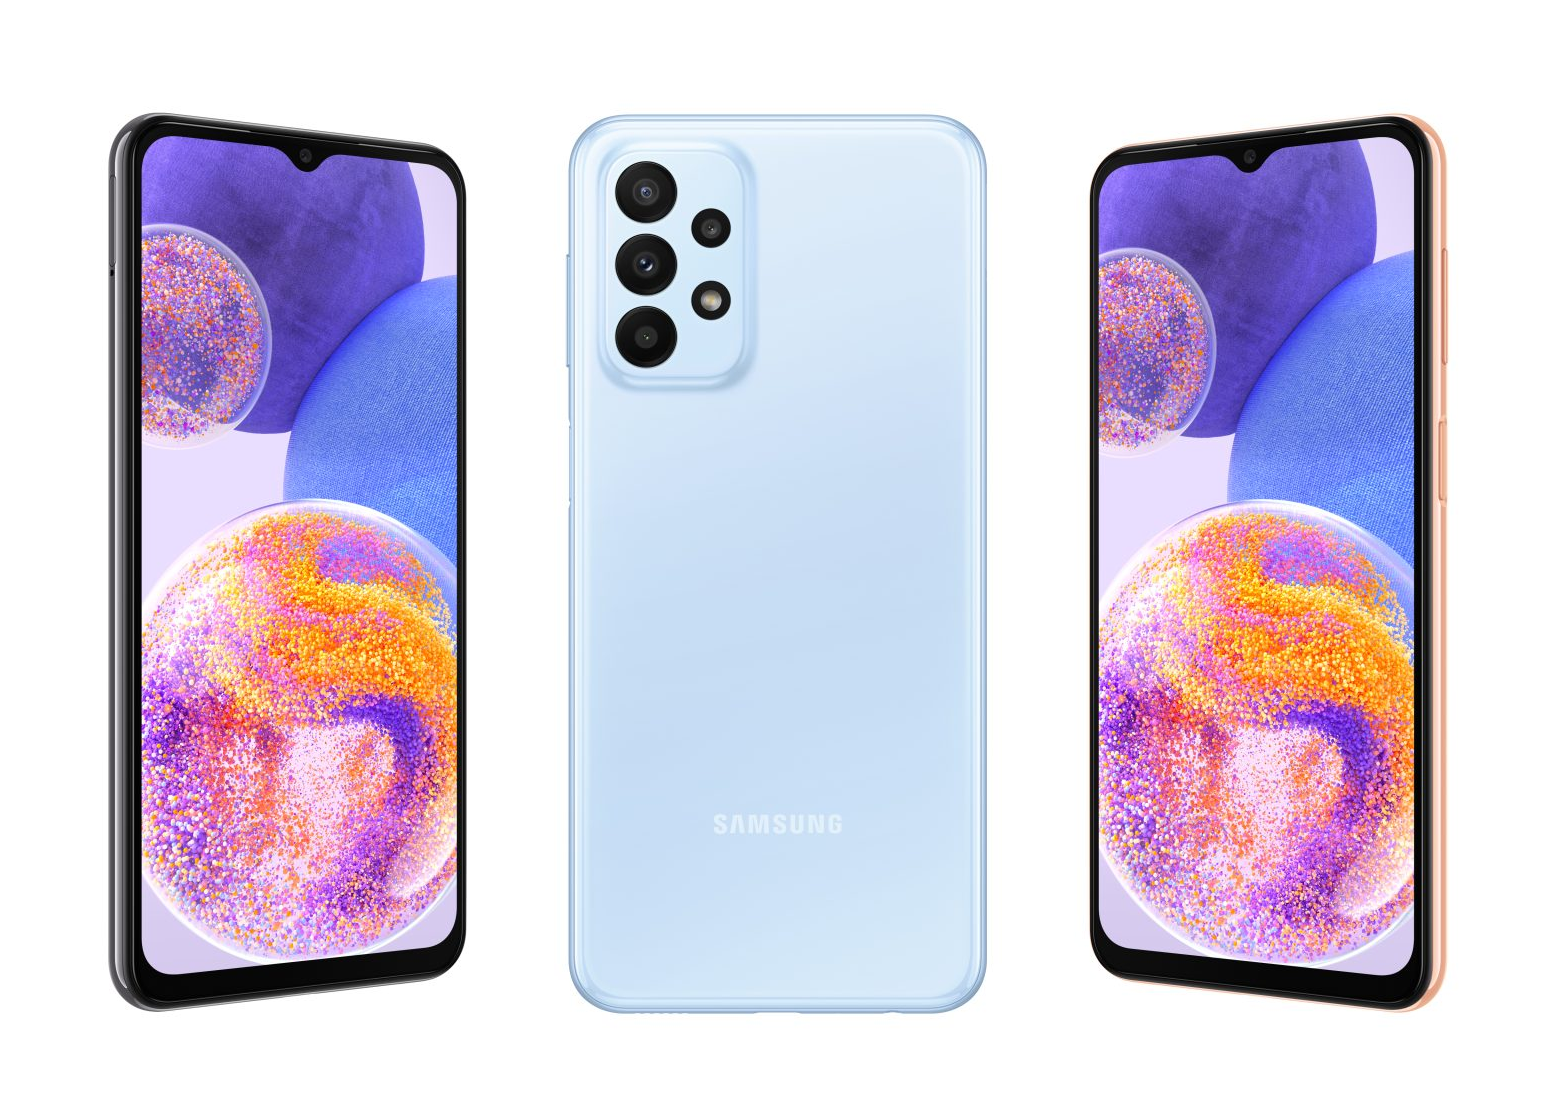 Samsung Galaxy A23: New entry-level Galaxy A series smartphone released  with a 6.6-inch display, a 5,000 mAh battery and up to 8 GB of RAM -   News